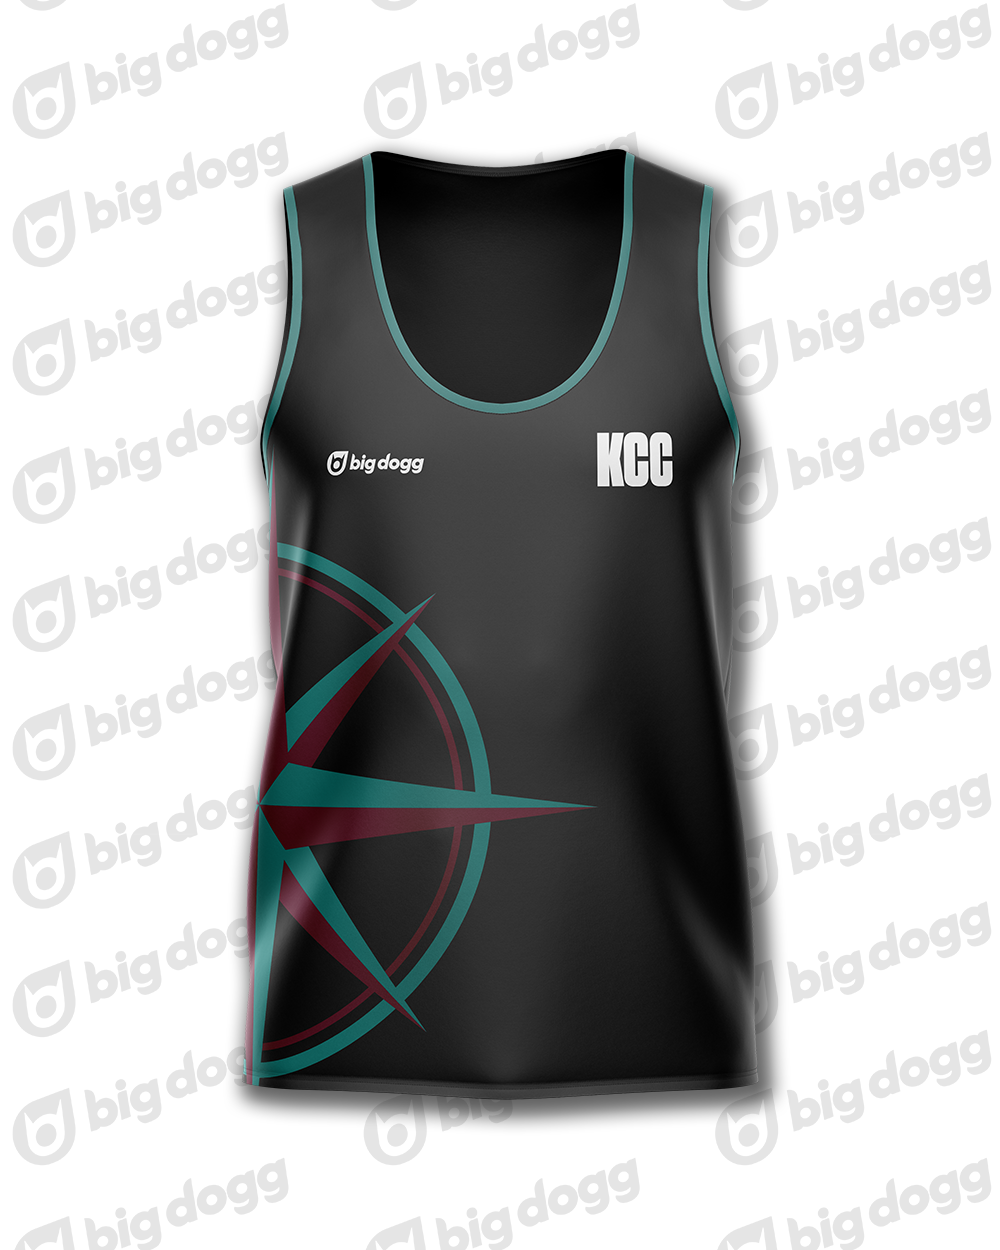 Singlet-updated.png